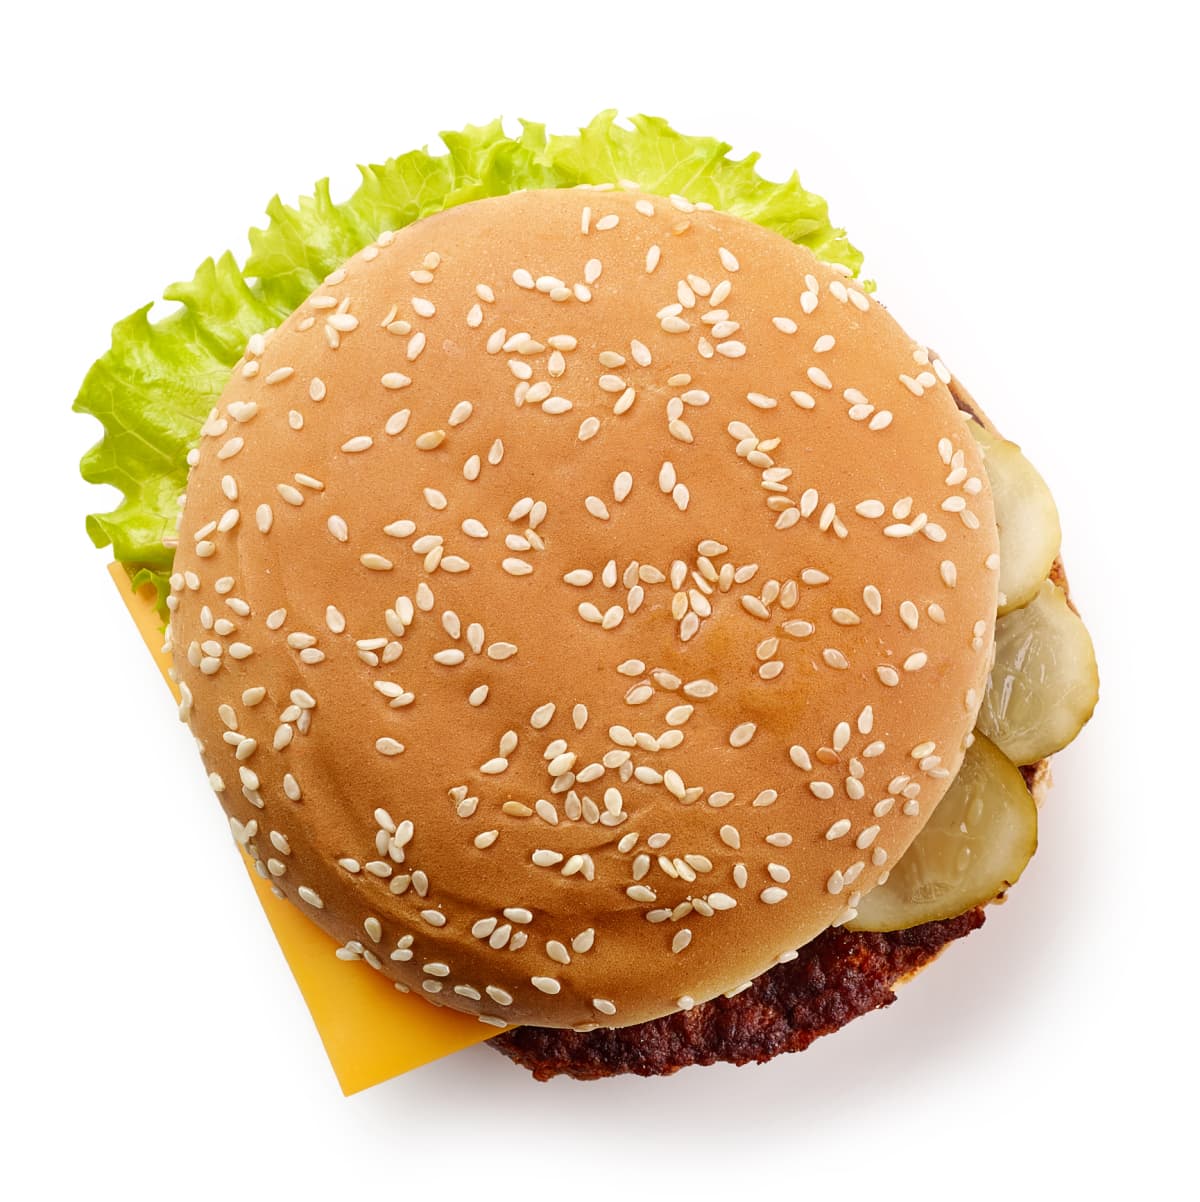 A cheeseburger on a white background.